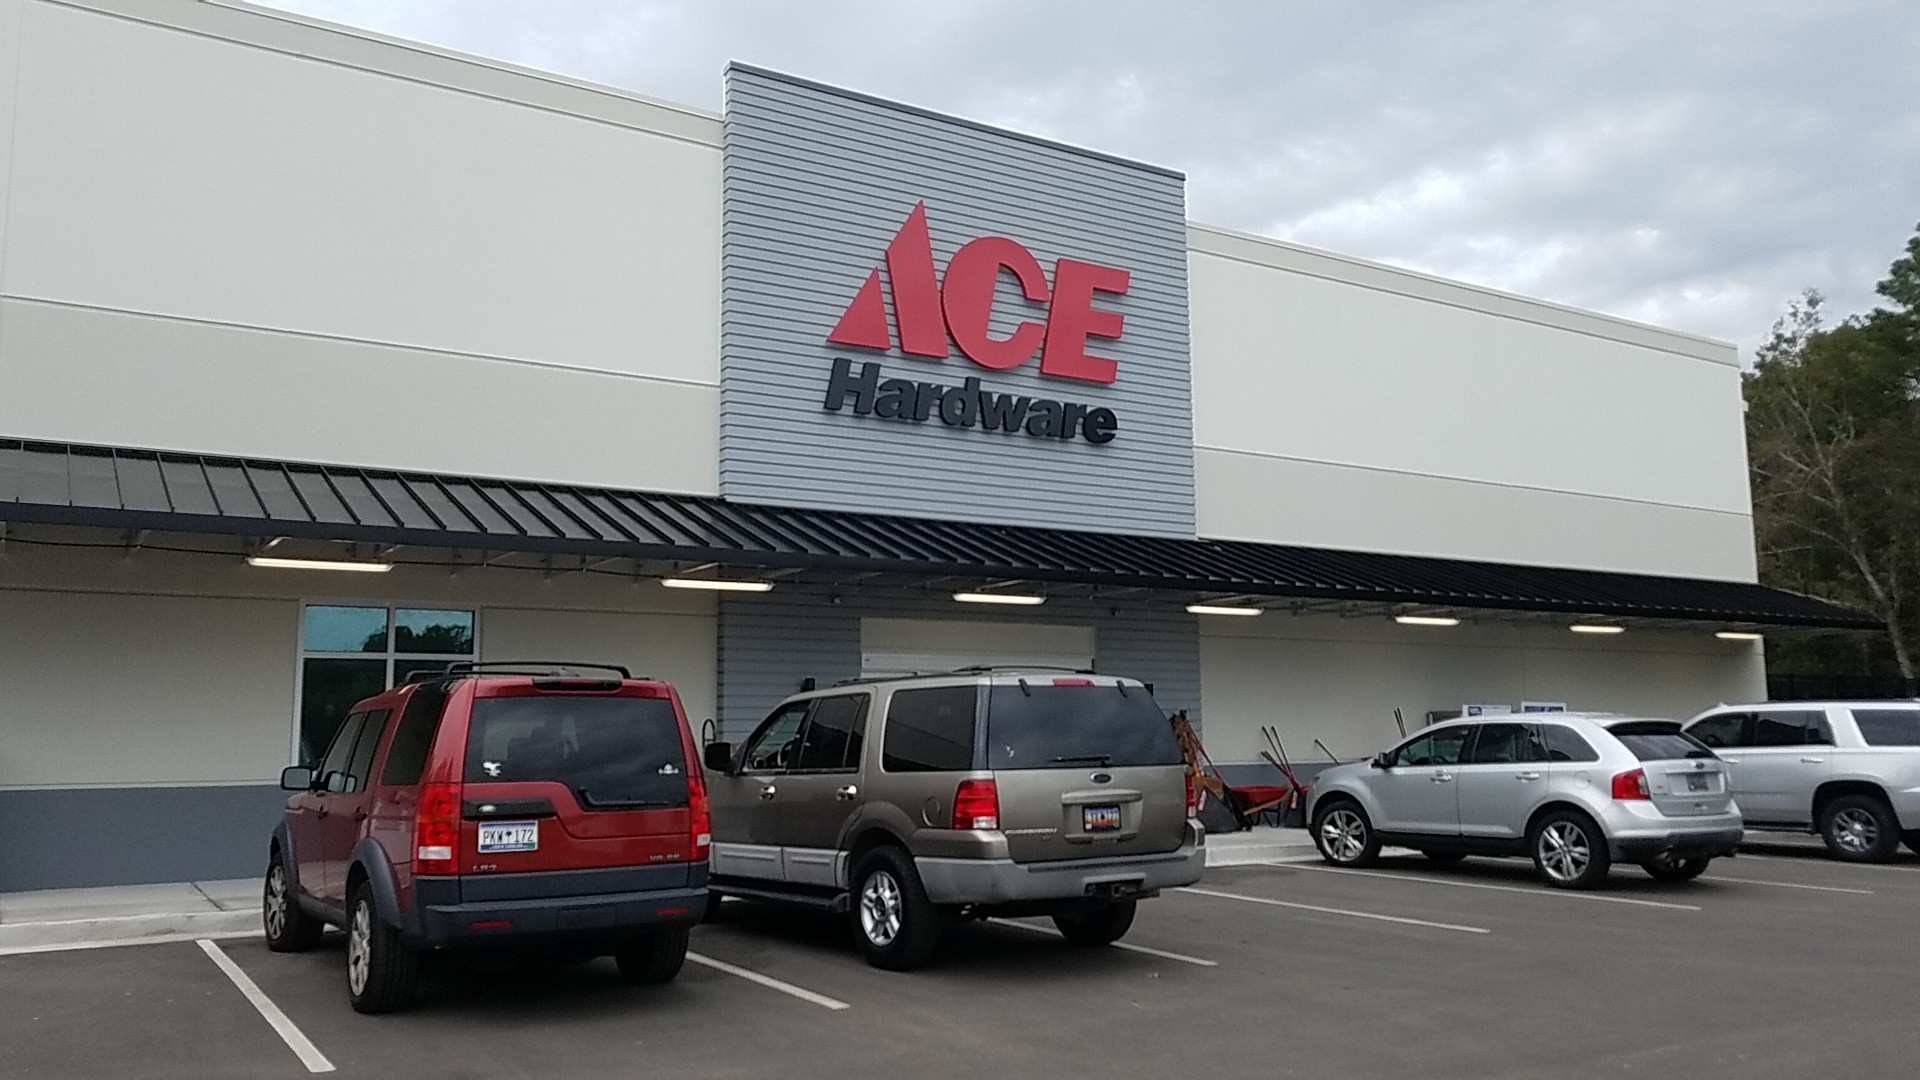 Clements Ferry Ace Hardware